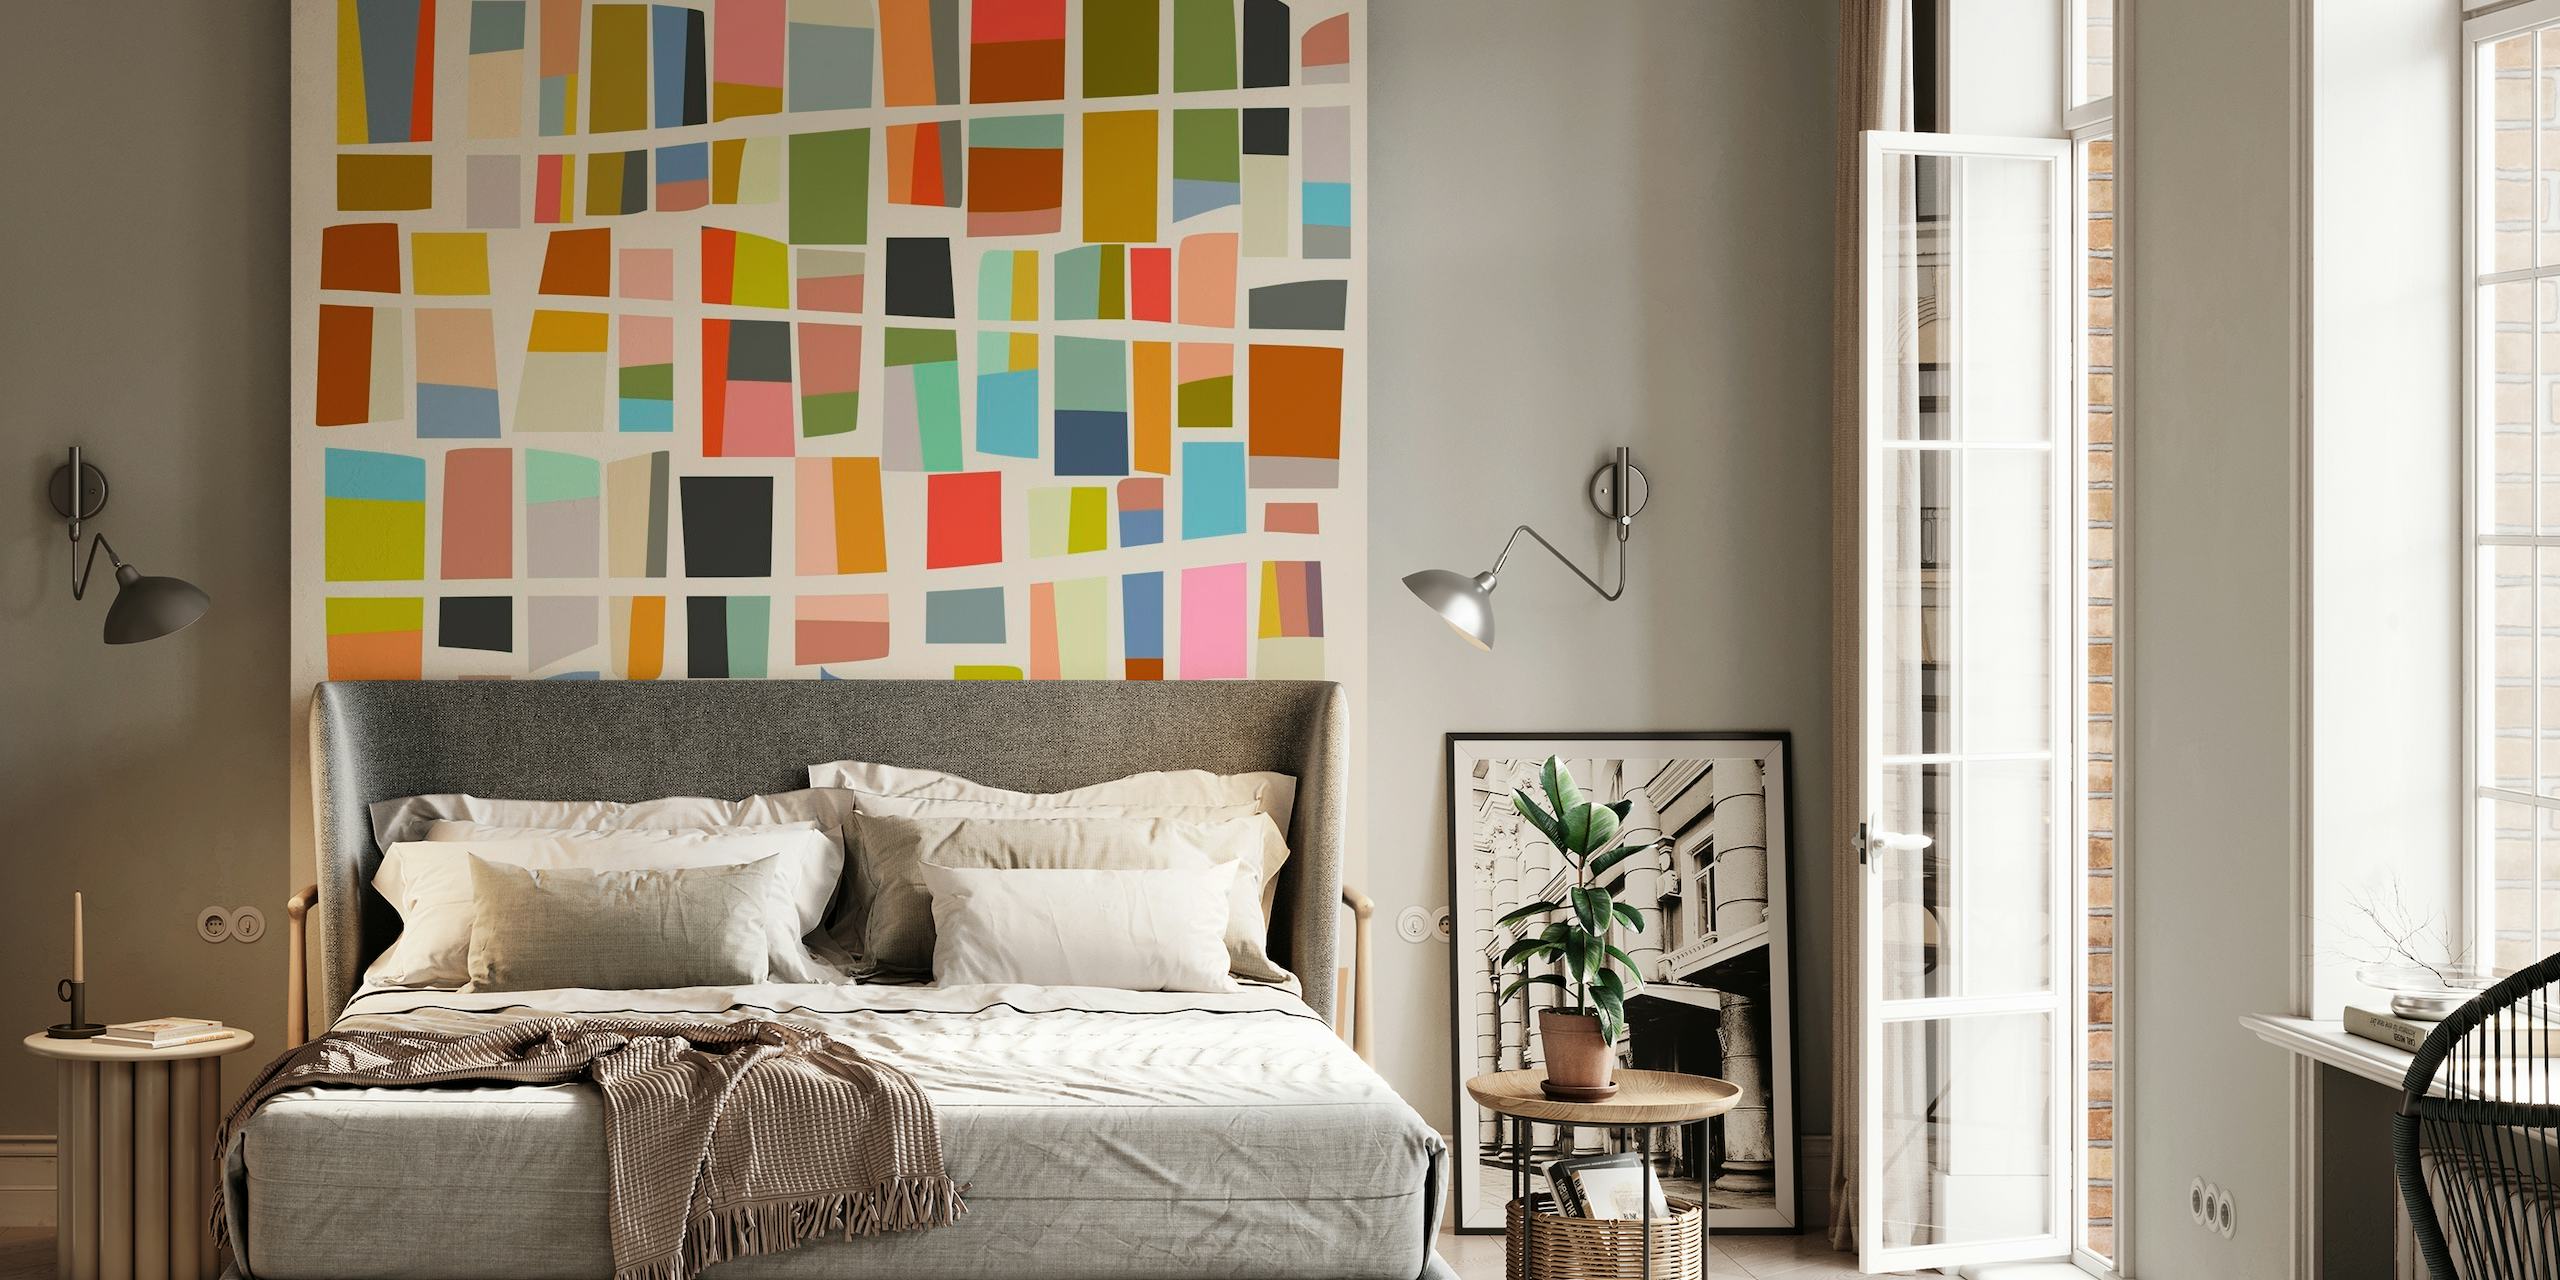 Abstract Colored Parts 8 wall mural with geometric shapes in various hues